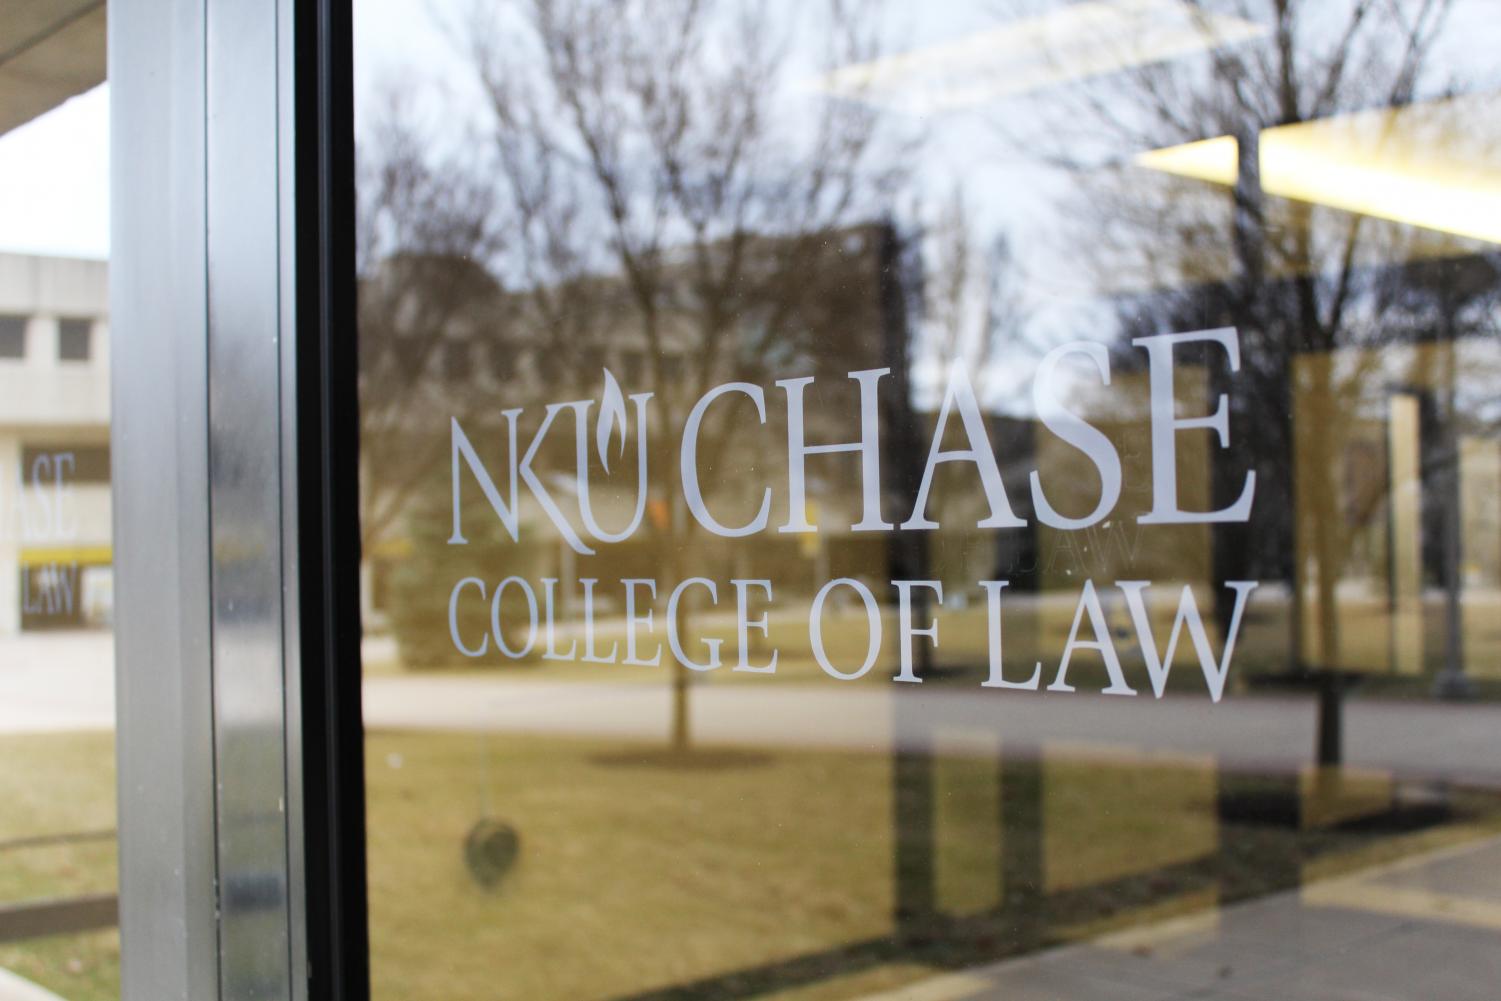 Salmon P. Chase College of Law and  the NKU branch of the UK College of Medicine are set to move to Covington.